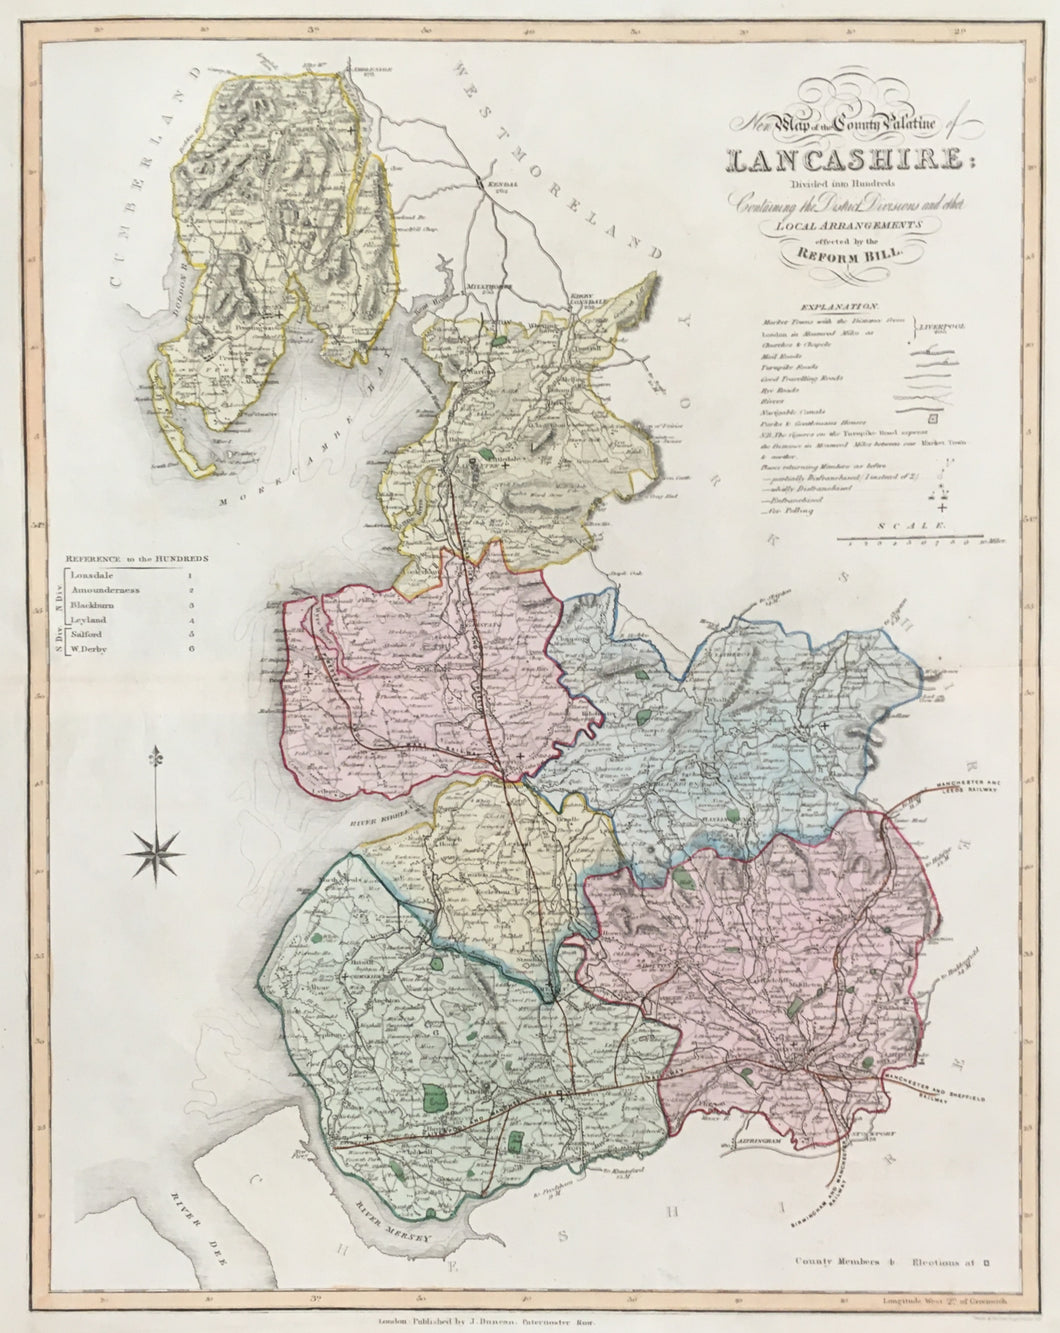 Ebden, William “New Map of the County of Lancashire.”